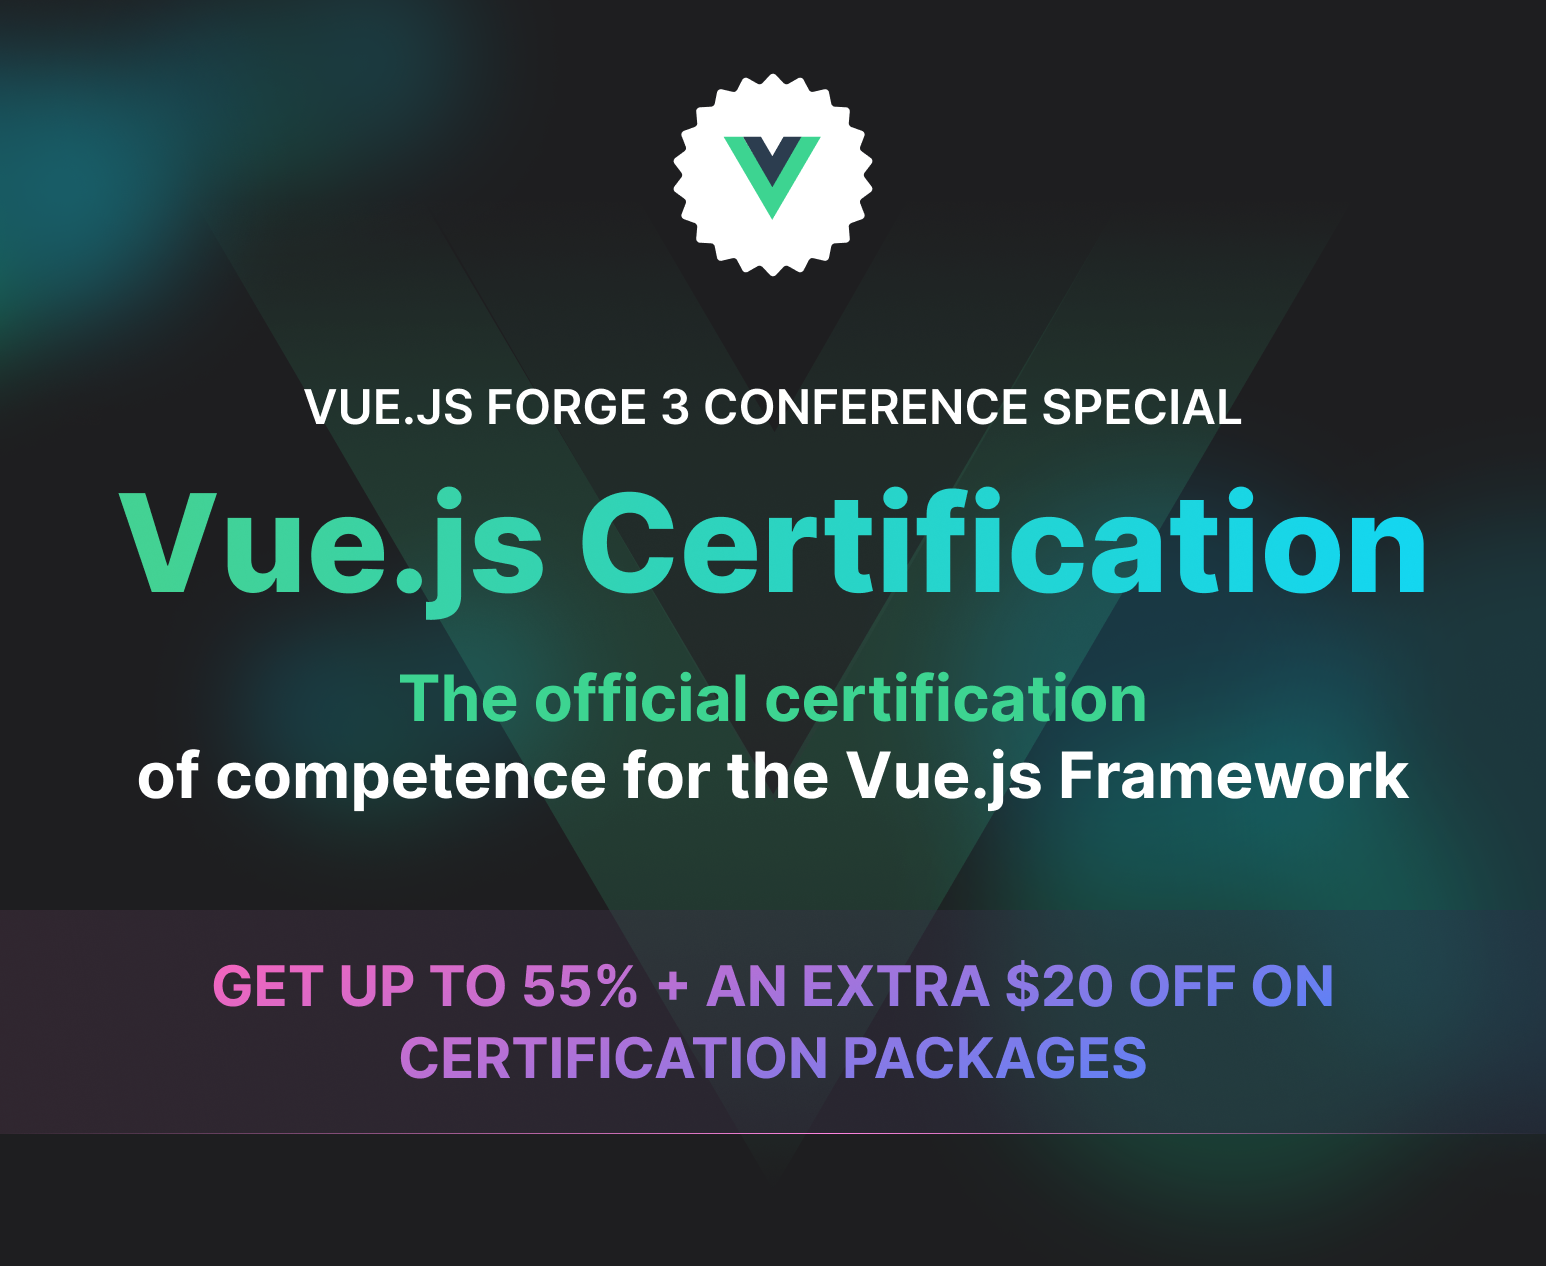 Get up to 55% + an extra $20 OFF Vue.js Certification